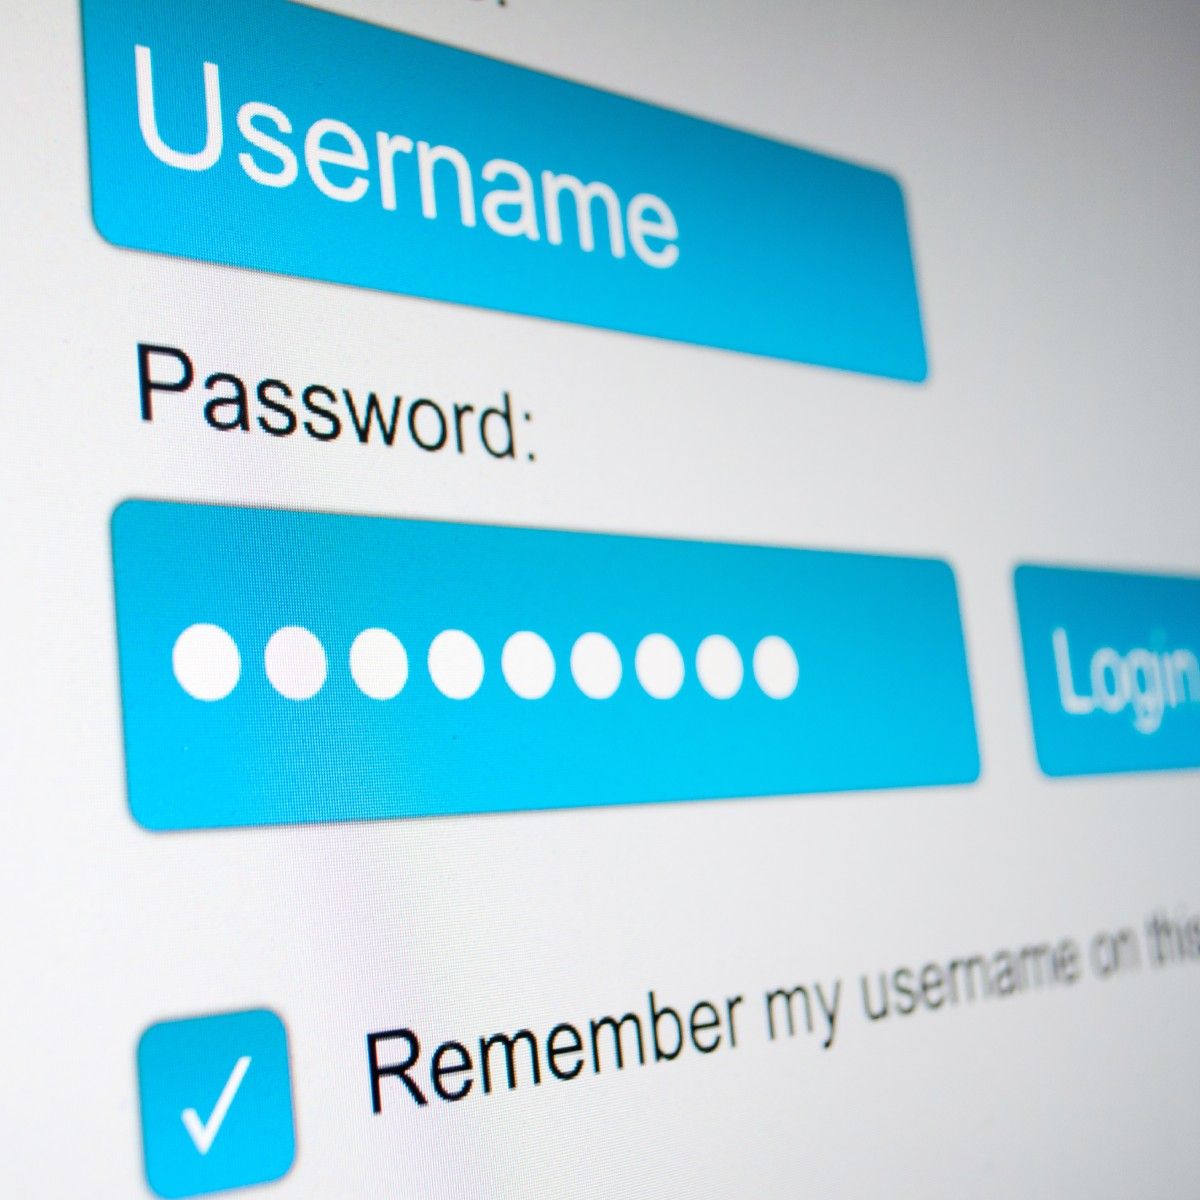 A close-up of a website login screen with username and password highlighted in blue and the option to remember my username selected